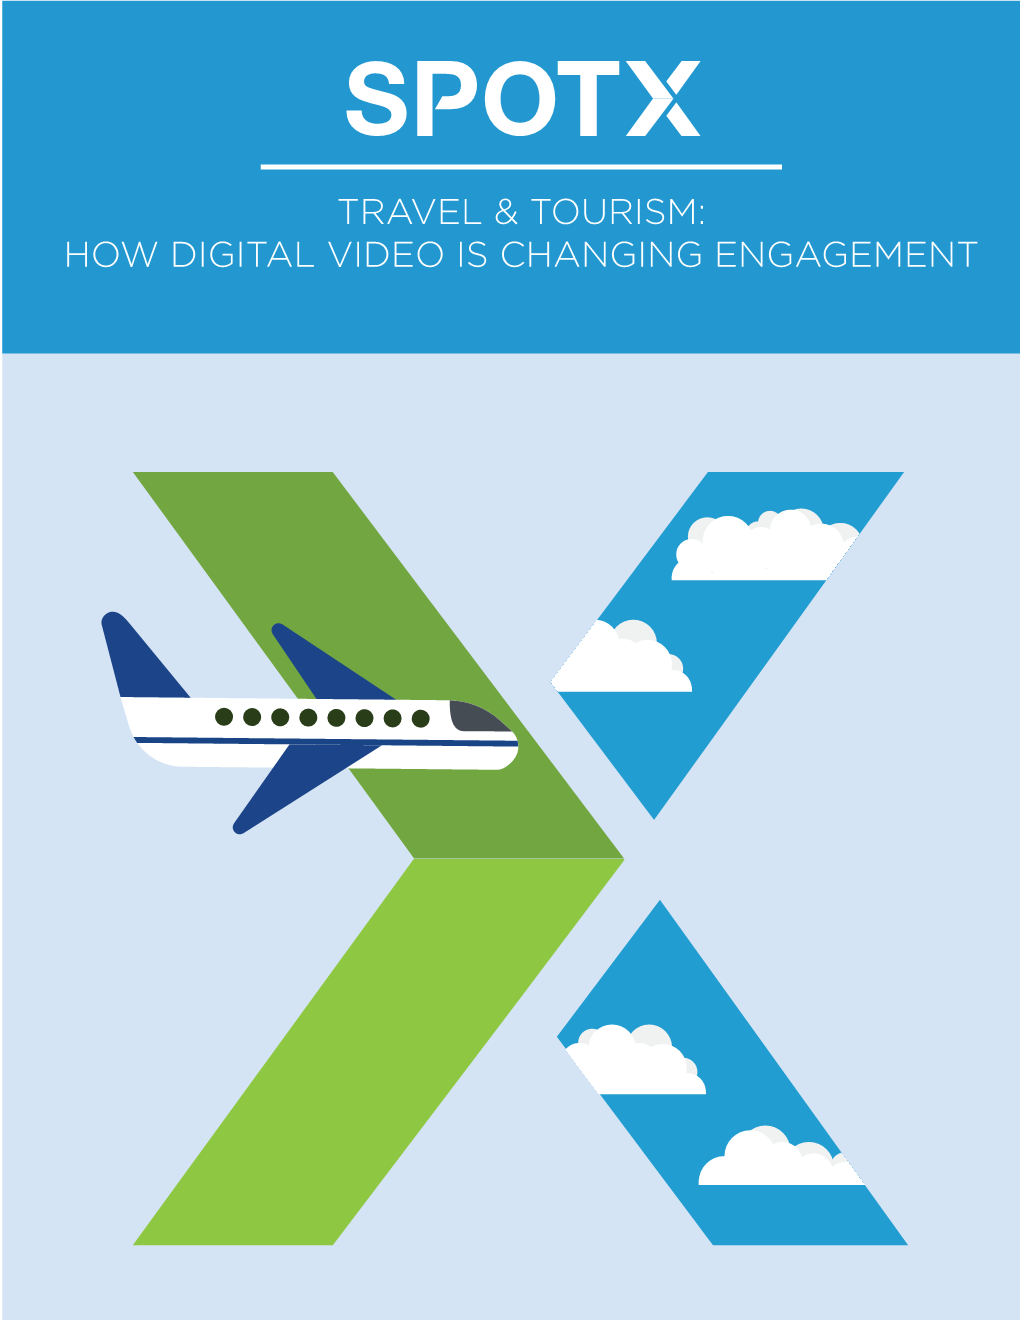 Travel & Tourism: How Digital Video Is Changing Engagement